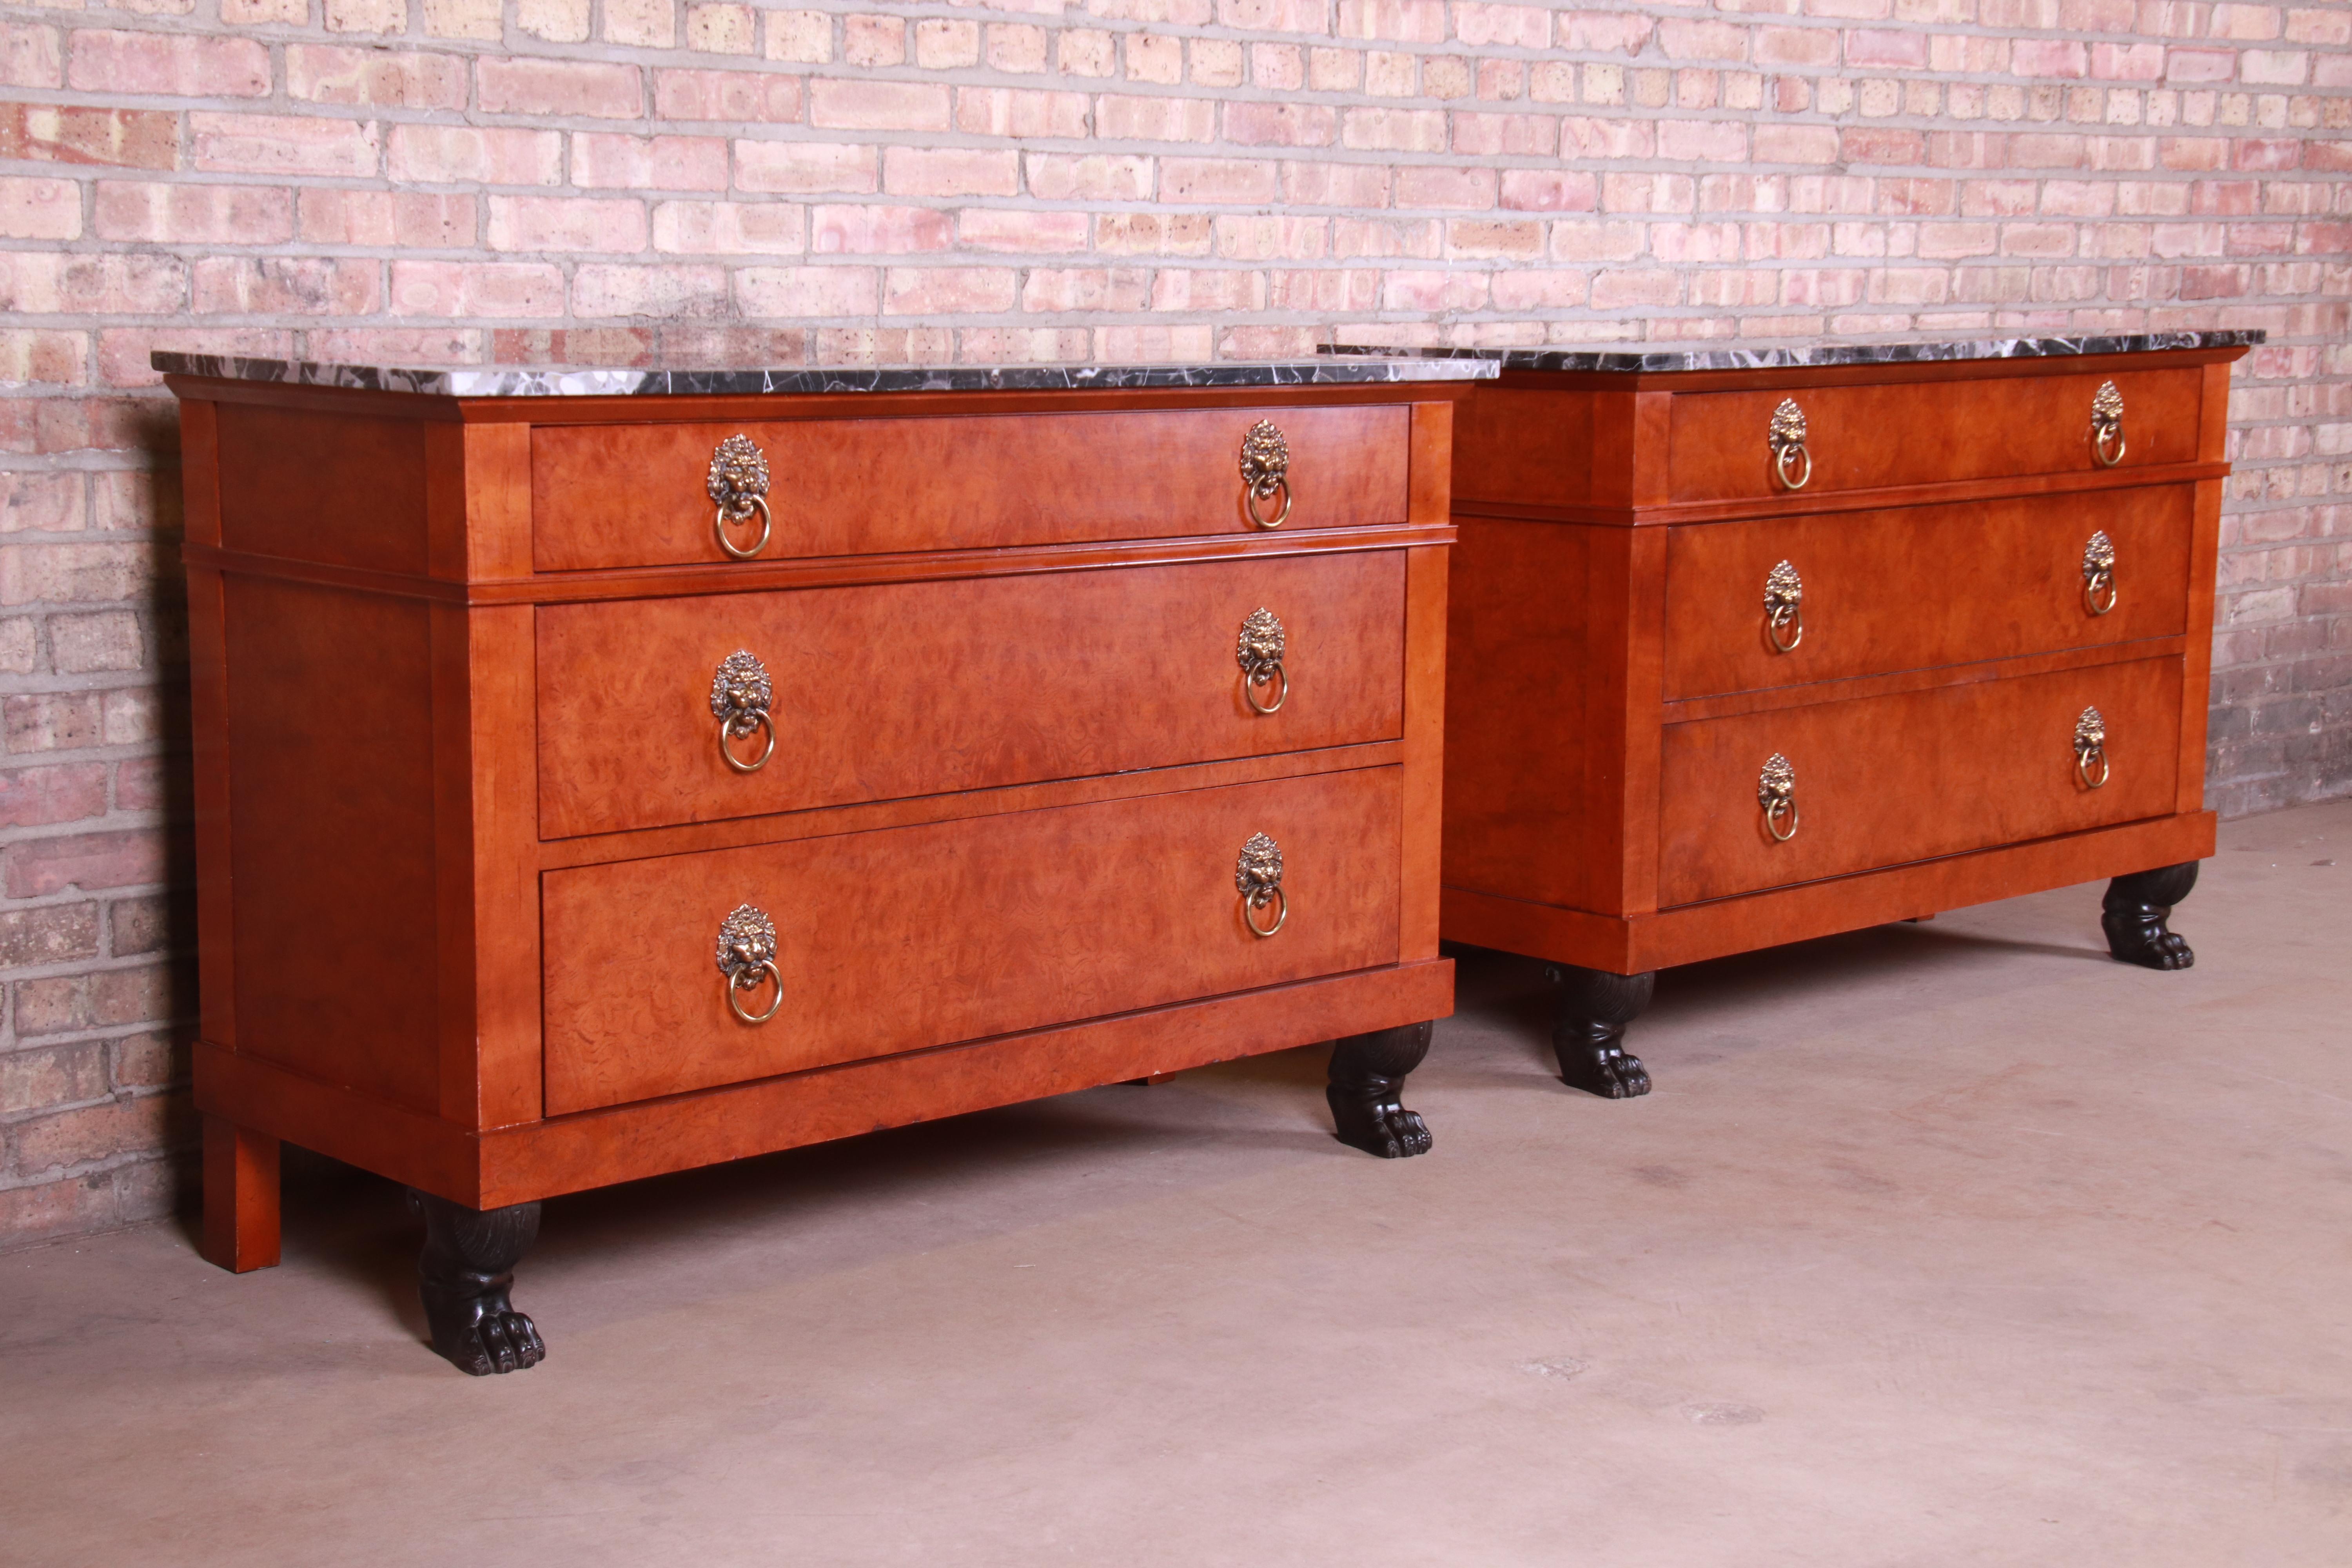 Brass Baker Furniture Neoclassical Burl Wood Marble-Top Chests, Pair